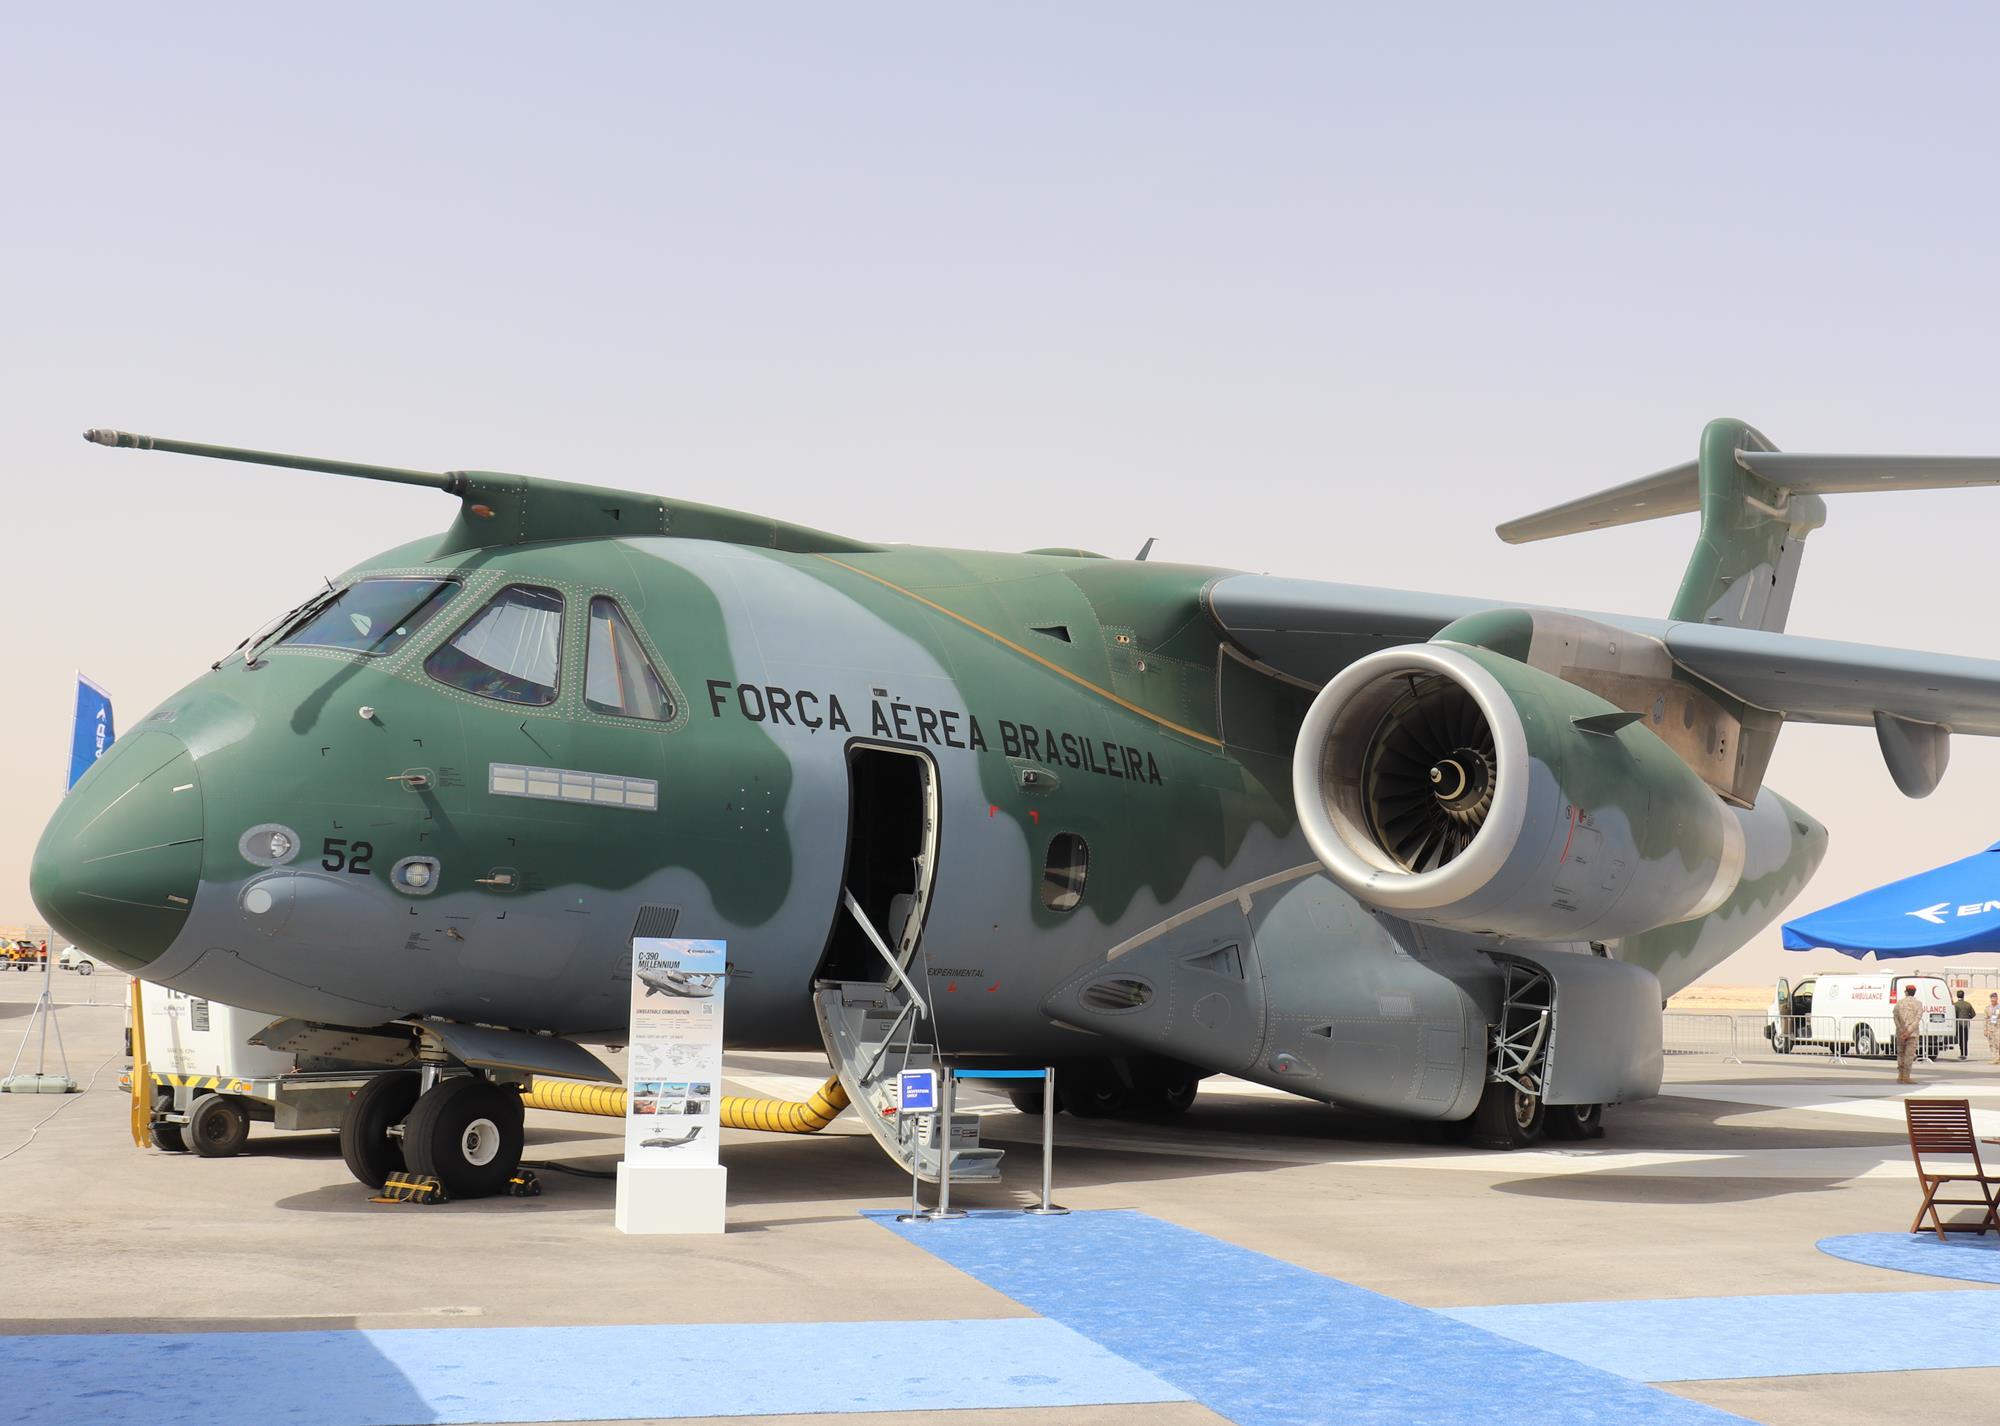 Saudi Arabia may replace 42 US C-130s with 33 Embraer C-390s